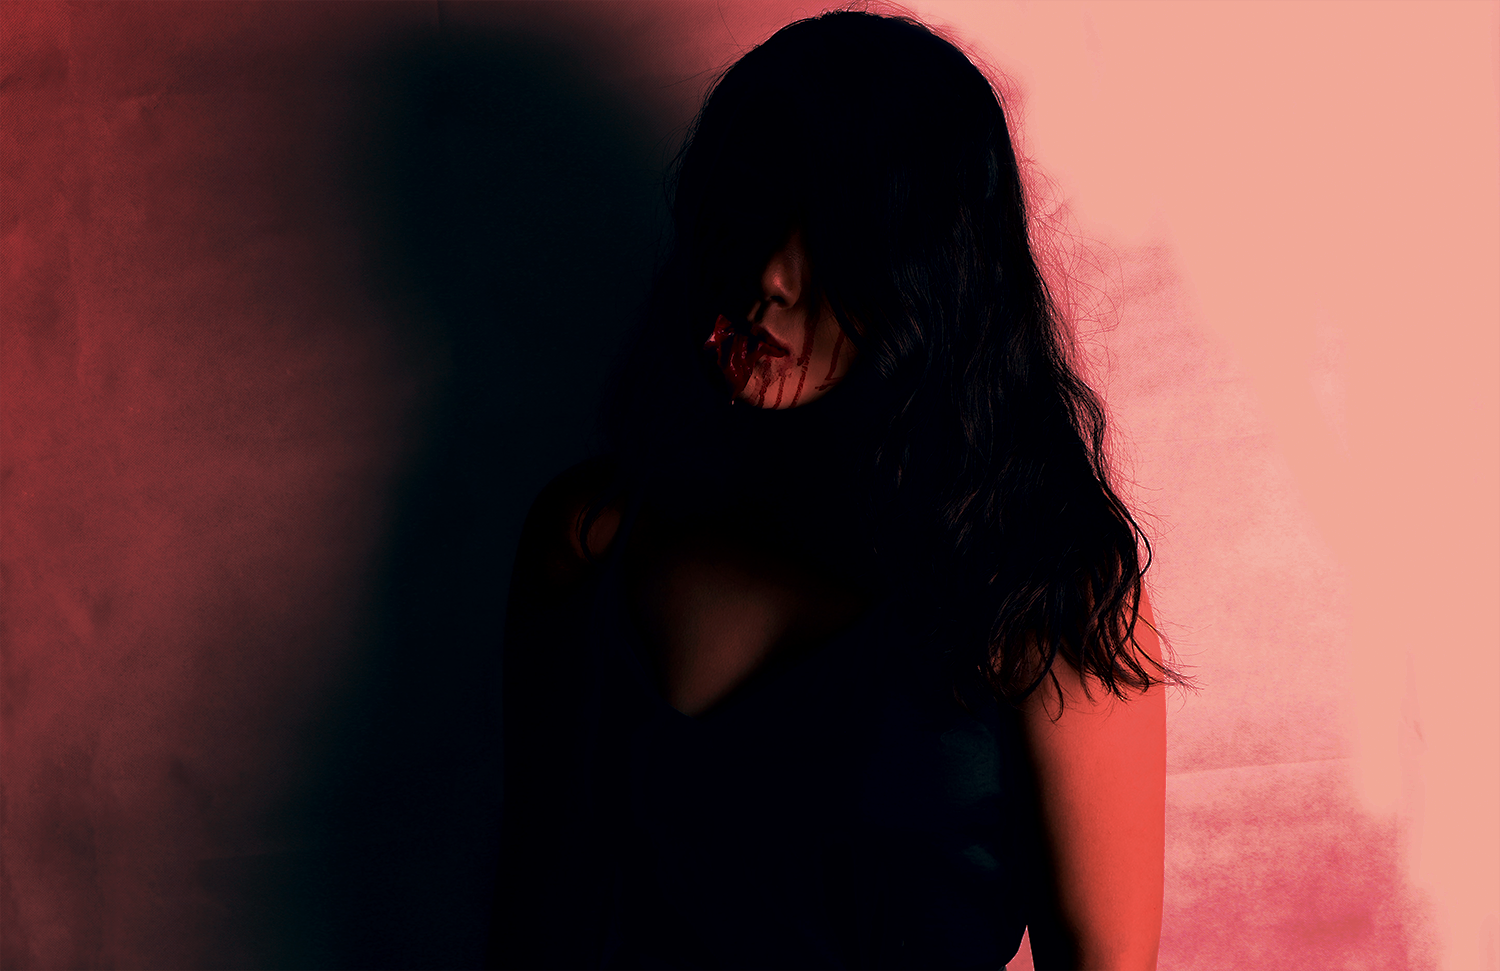 A dark photo of a girl leaning against a wall. Almost all of her face is in shadow with only her mouth visible - which appears to be dripping blood